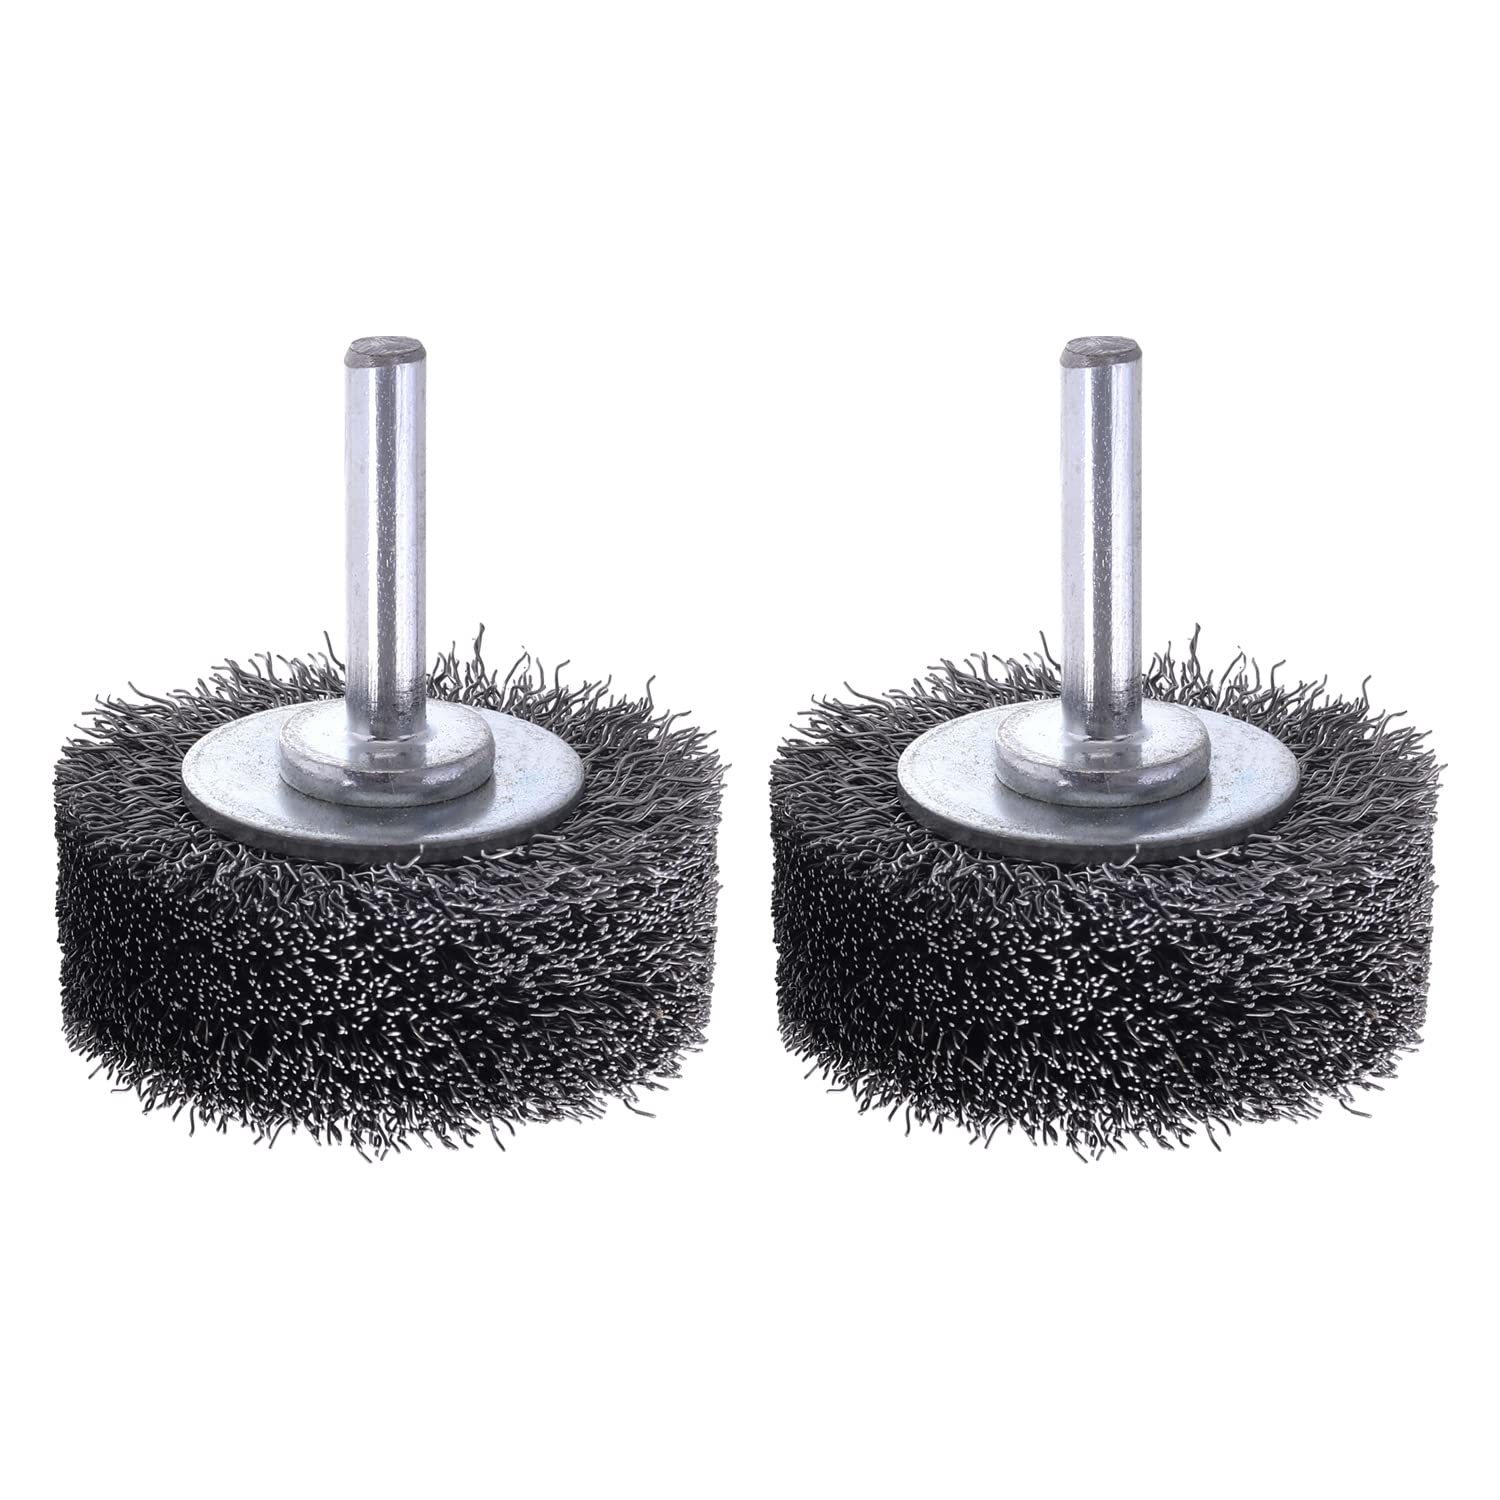 Primary image for 2 Pack Wire Wheel Brush Wire Wheel Brush For Drill Attachment, 2 Inch Heavy Duty